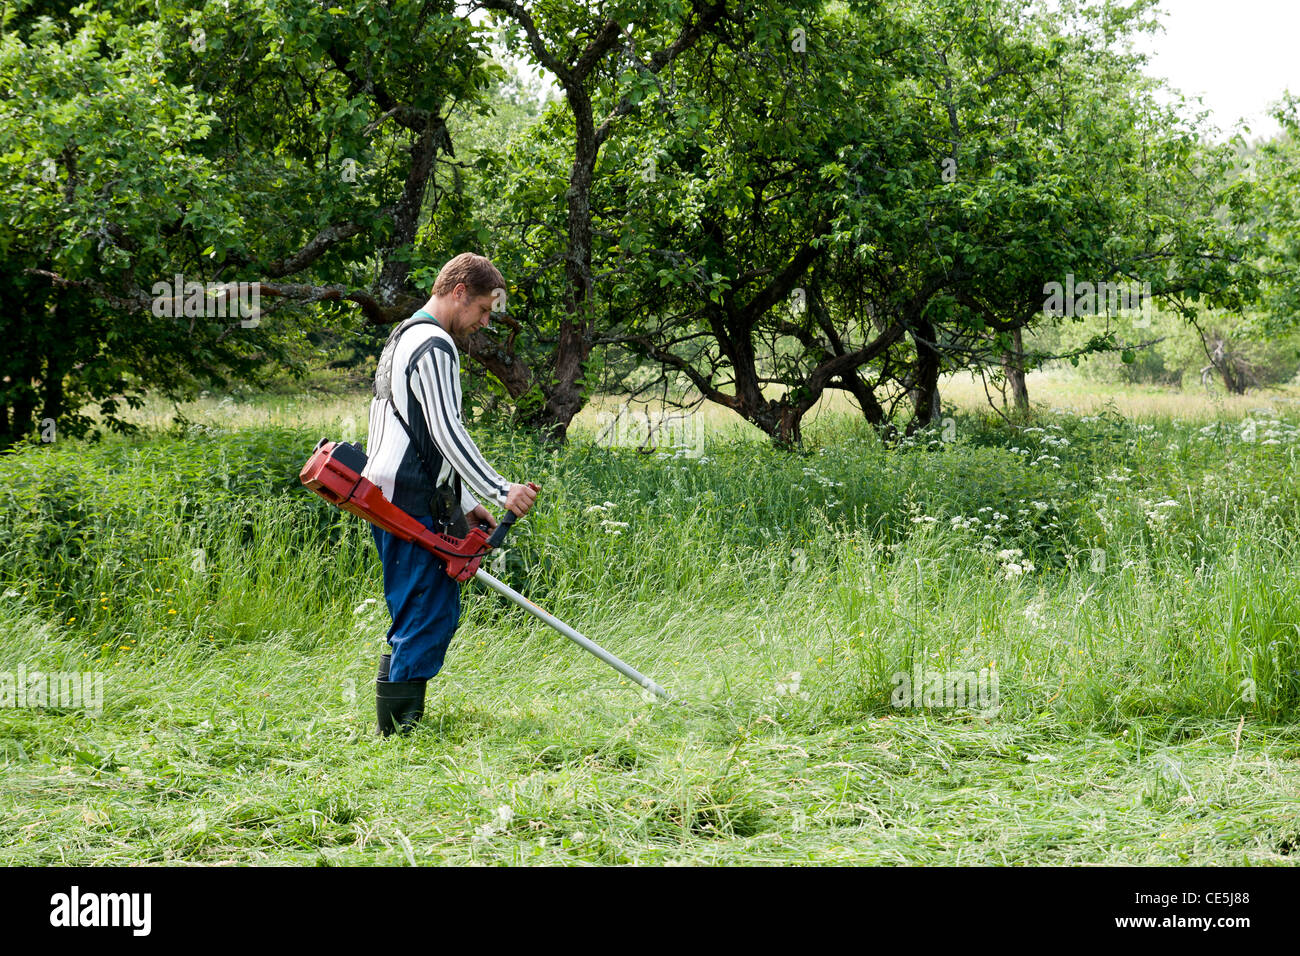 worker cutting grass in garden with the weed trimmer Stock Photo